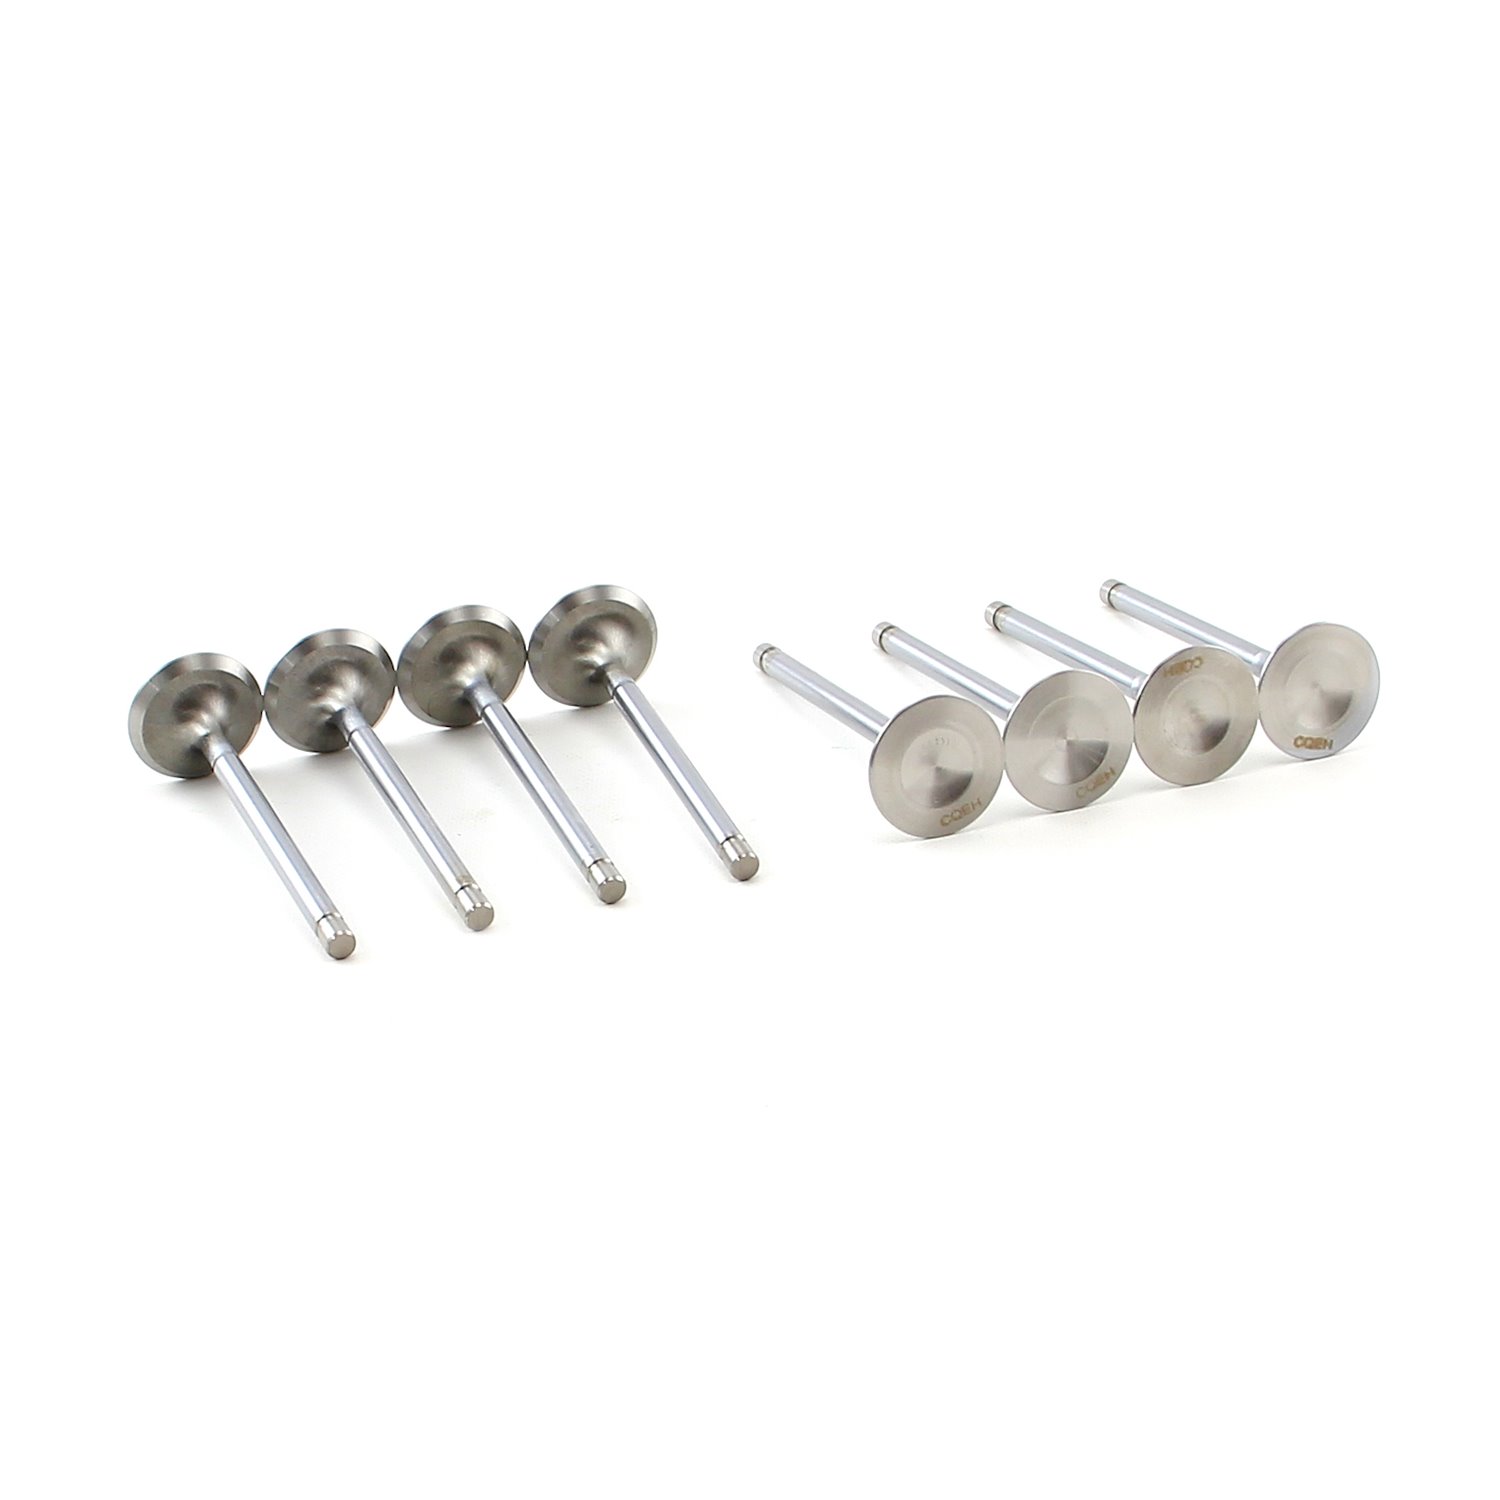 Chevy LS1 LS6 1.600 STD 8mm Stainless Steel Exhaust Valves Set 8pcs